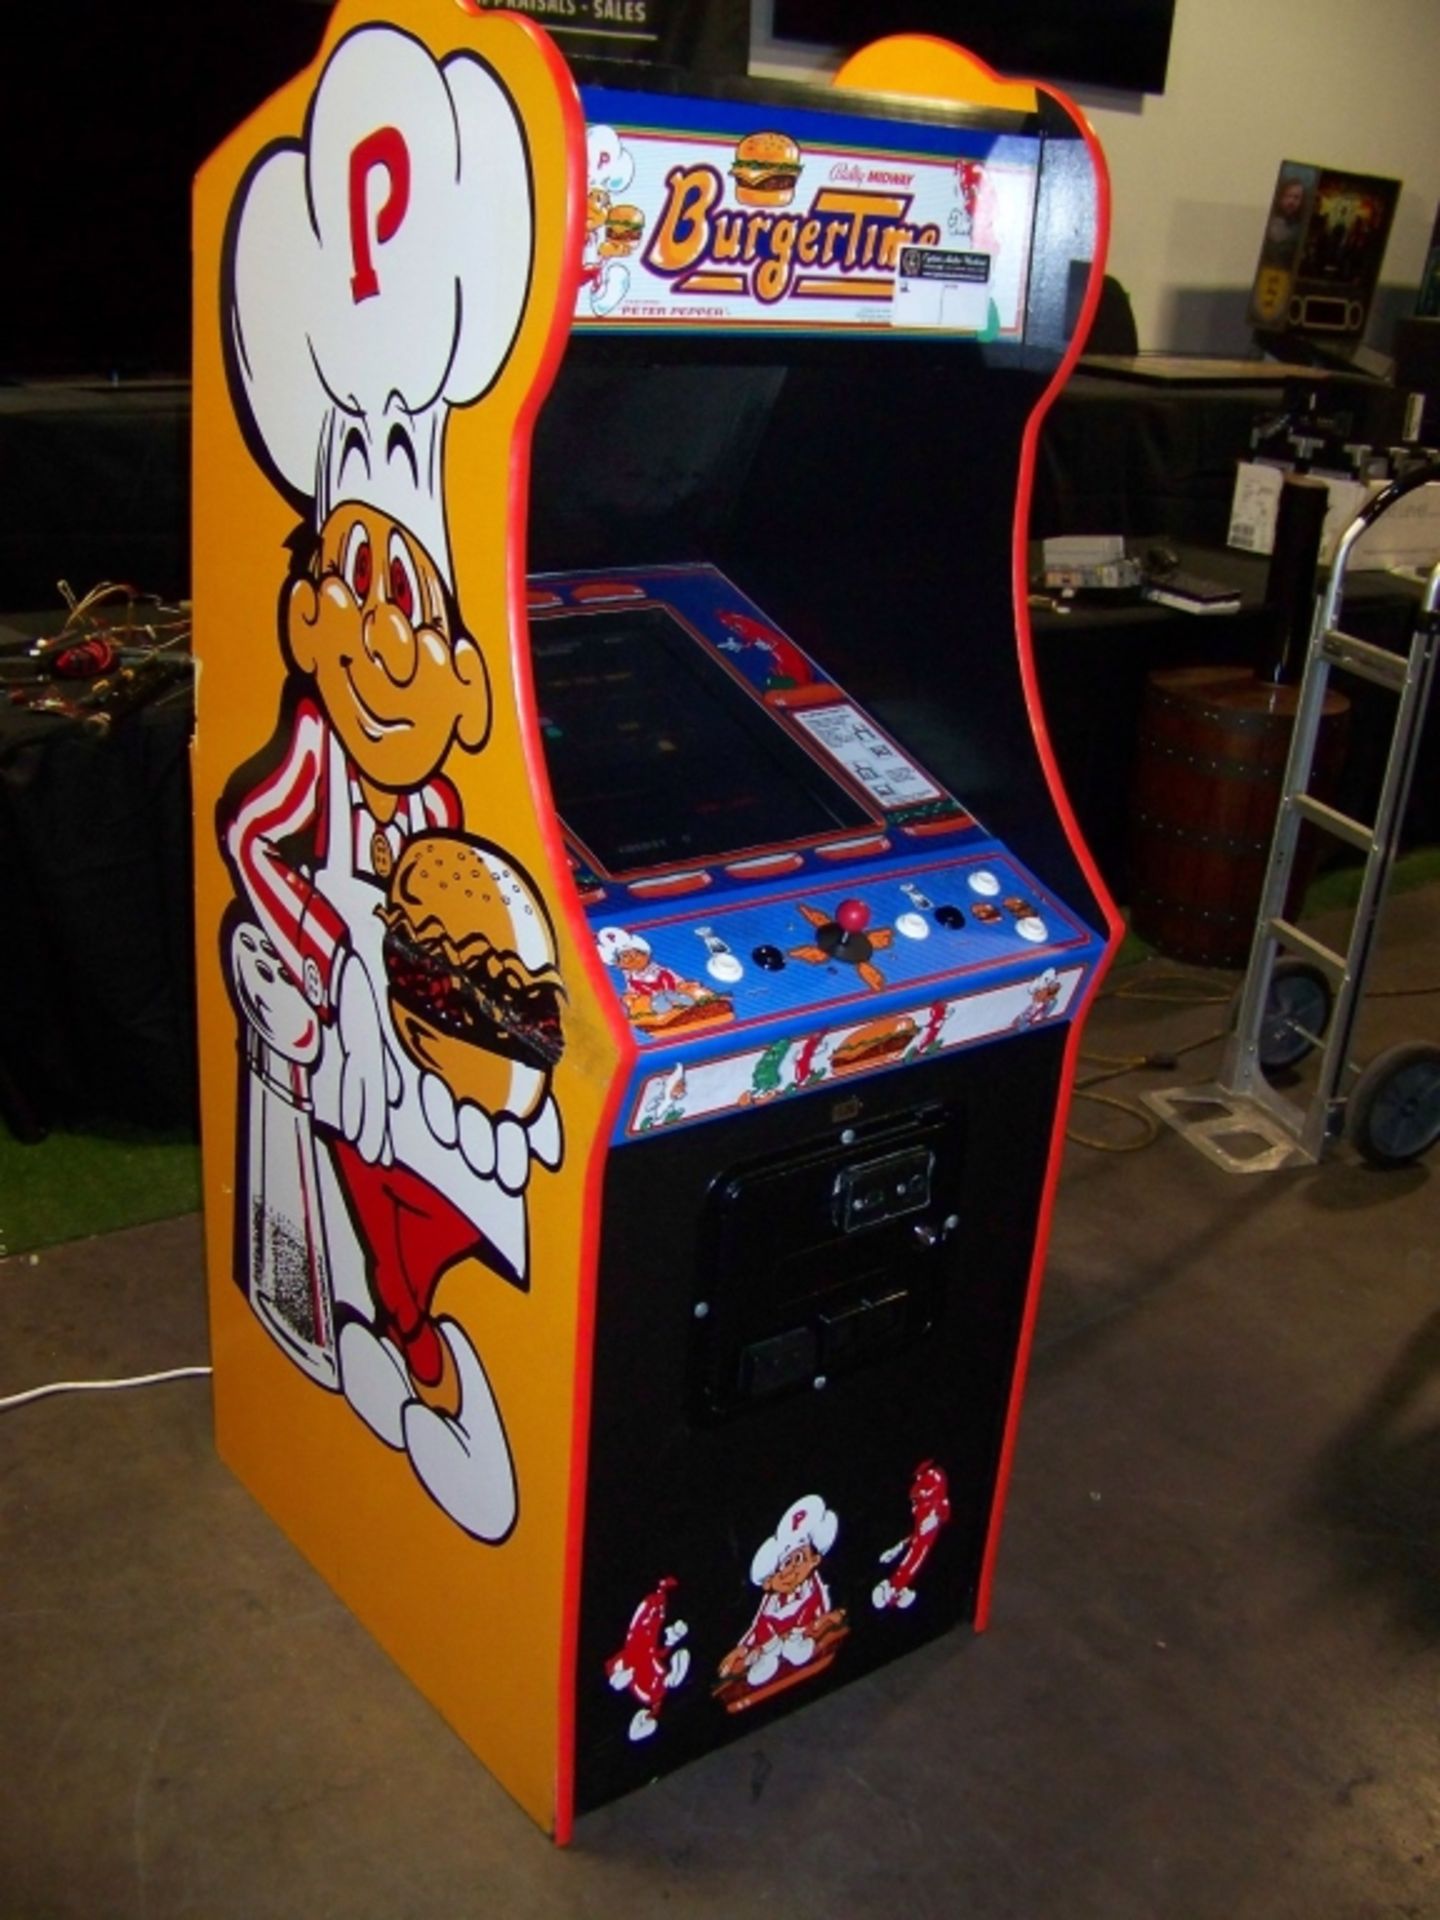 60 IN 1 MULTICADE BURGERTIME THEME CABINET LCD